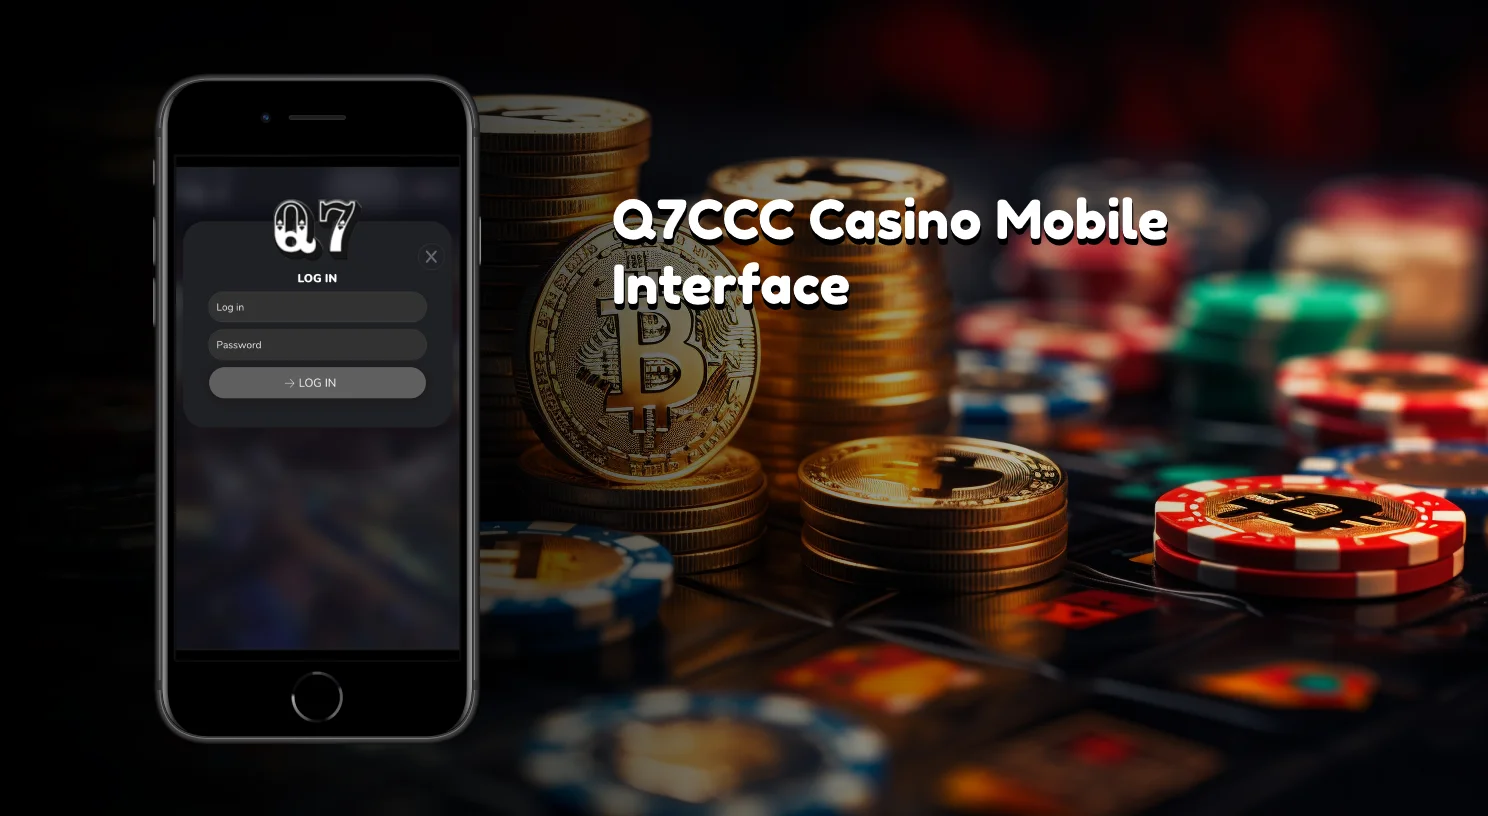 The image showcases the sleek, user-friendly interface of the Q7CCC Casino mobile app